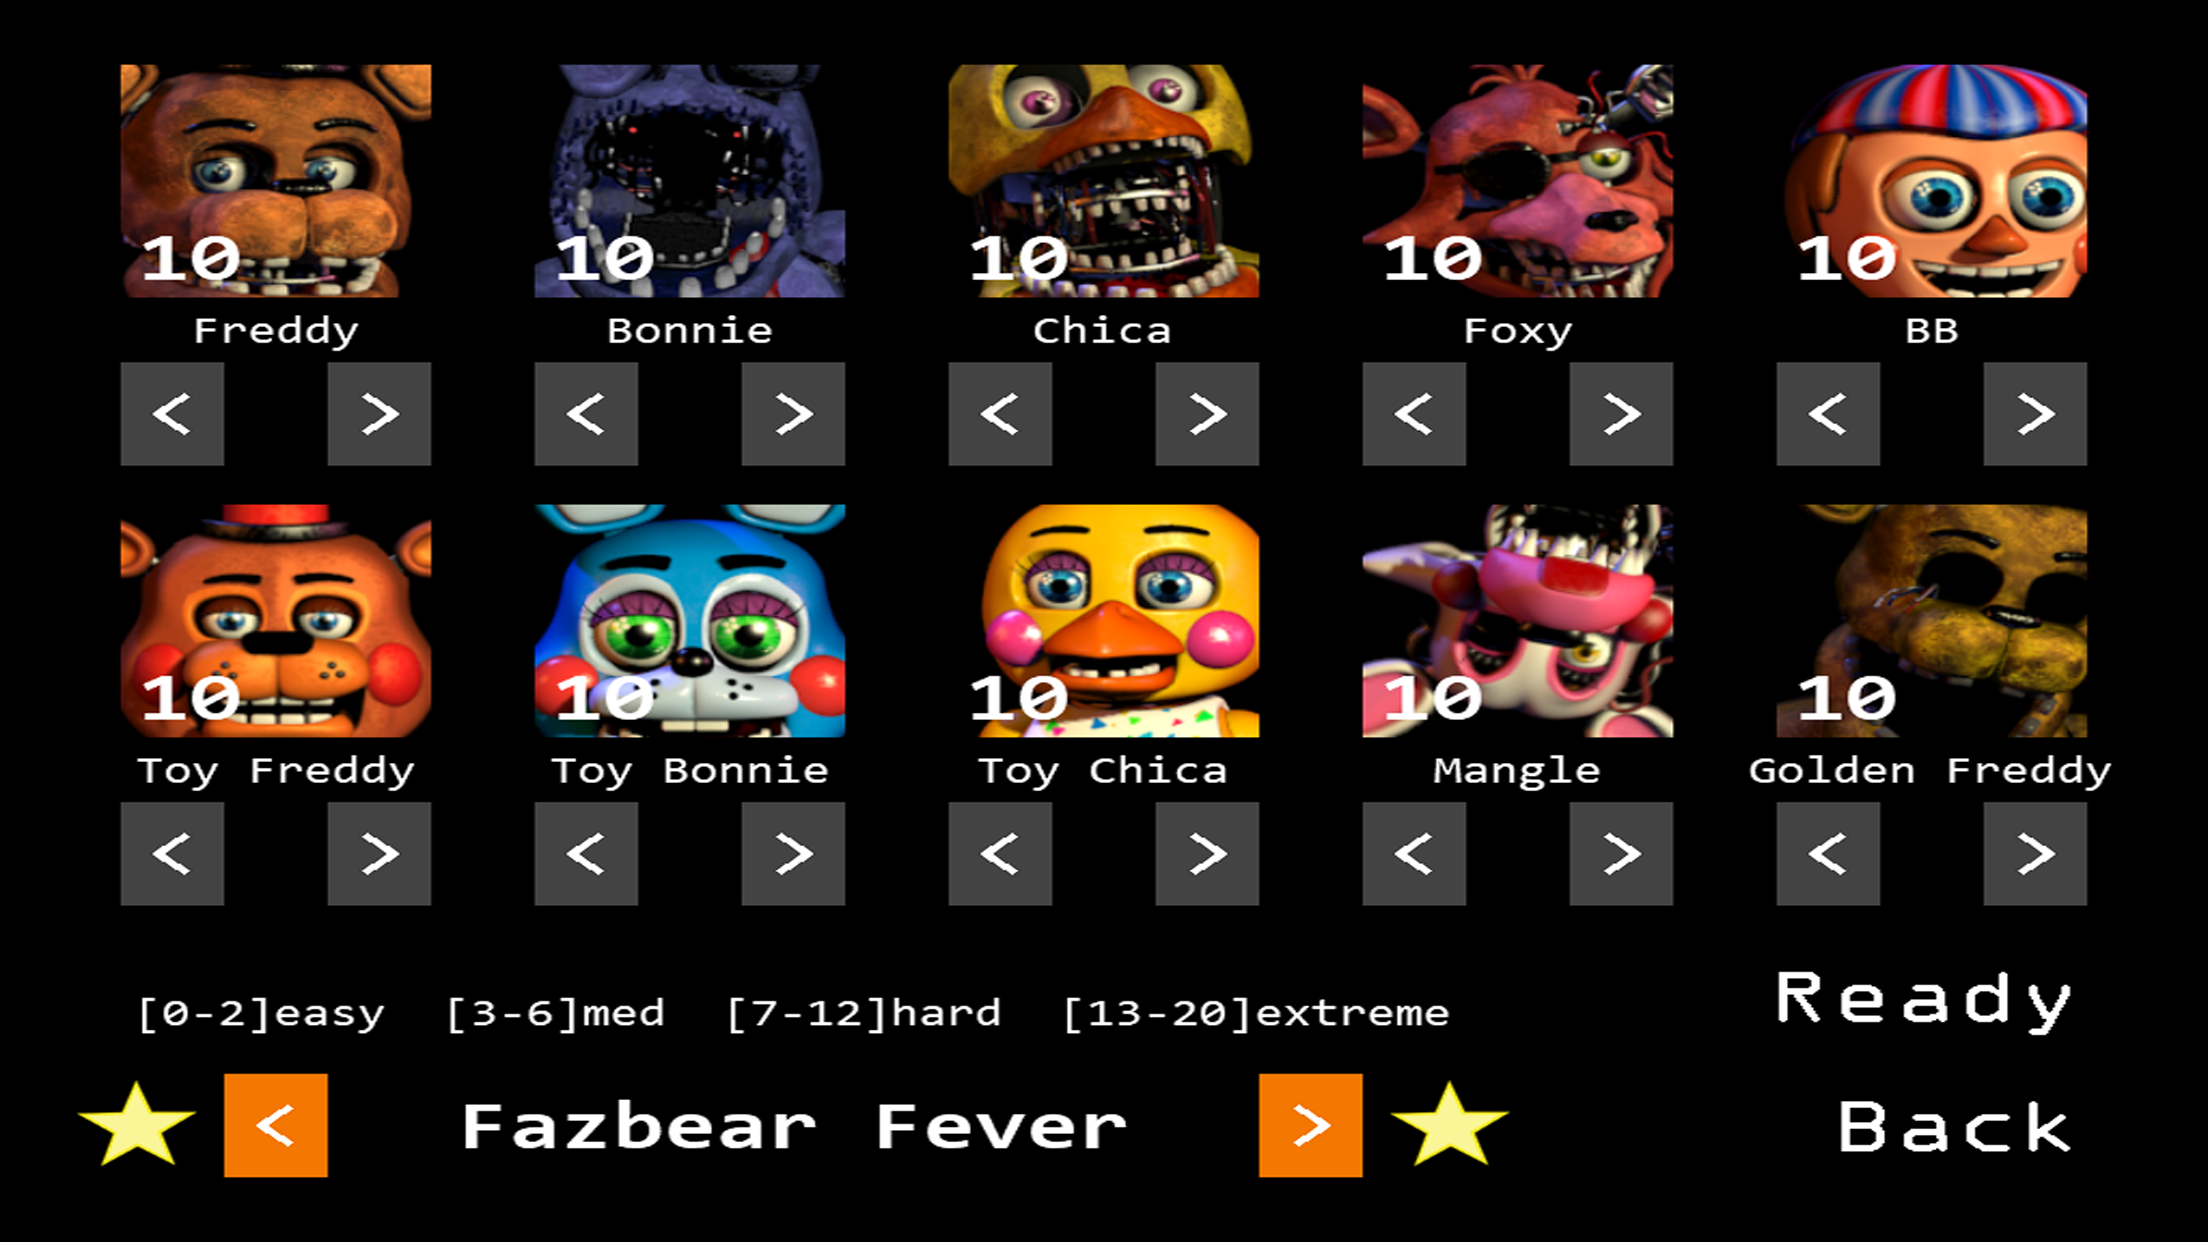 Download Five Nights at Freddy's 2 for PC/Five Nights at Freddy's 2 on PC -  Andy - Android Emulator for PC & Mac